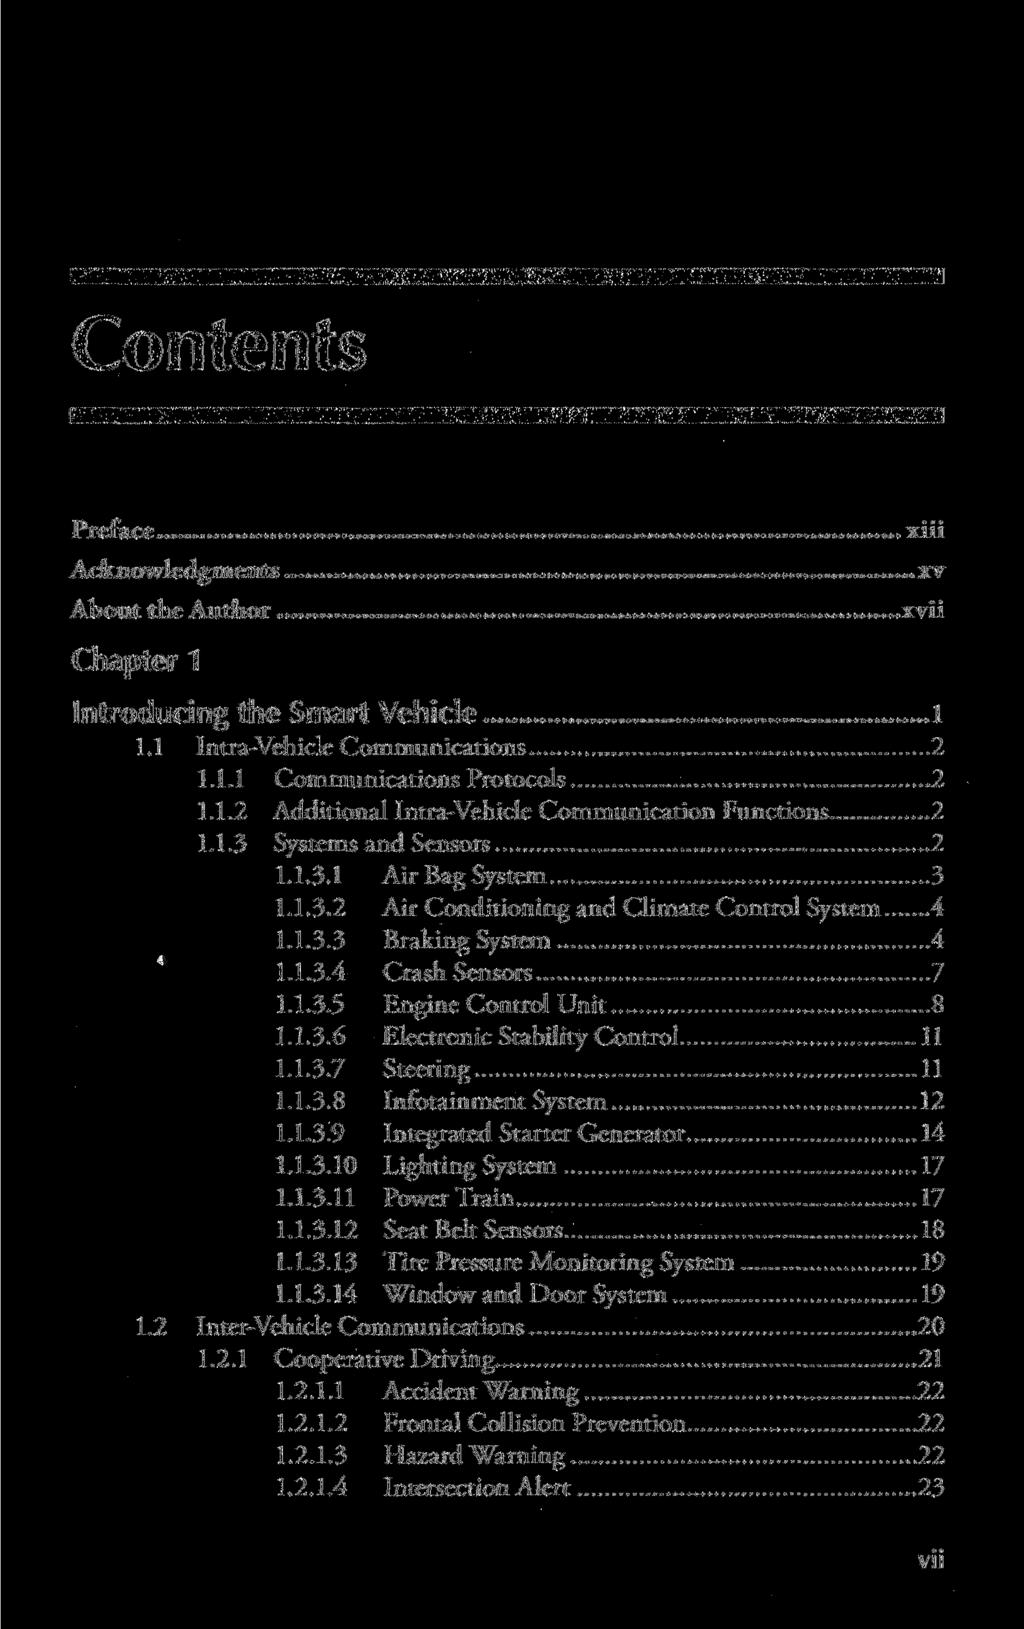 Contents Preface Acknowledgments About the Author Chapter 1 Introducing the Smart Vehicle 1.1 Intra-Vehicle Communications 2 1.1.1 Communications Protocols 2 1.1.2 Additional Intra-Vehicle Communication Functions 2 1.